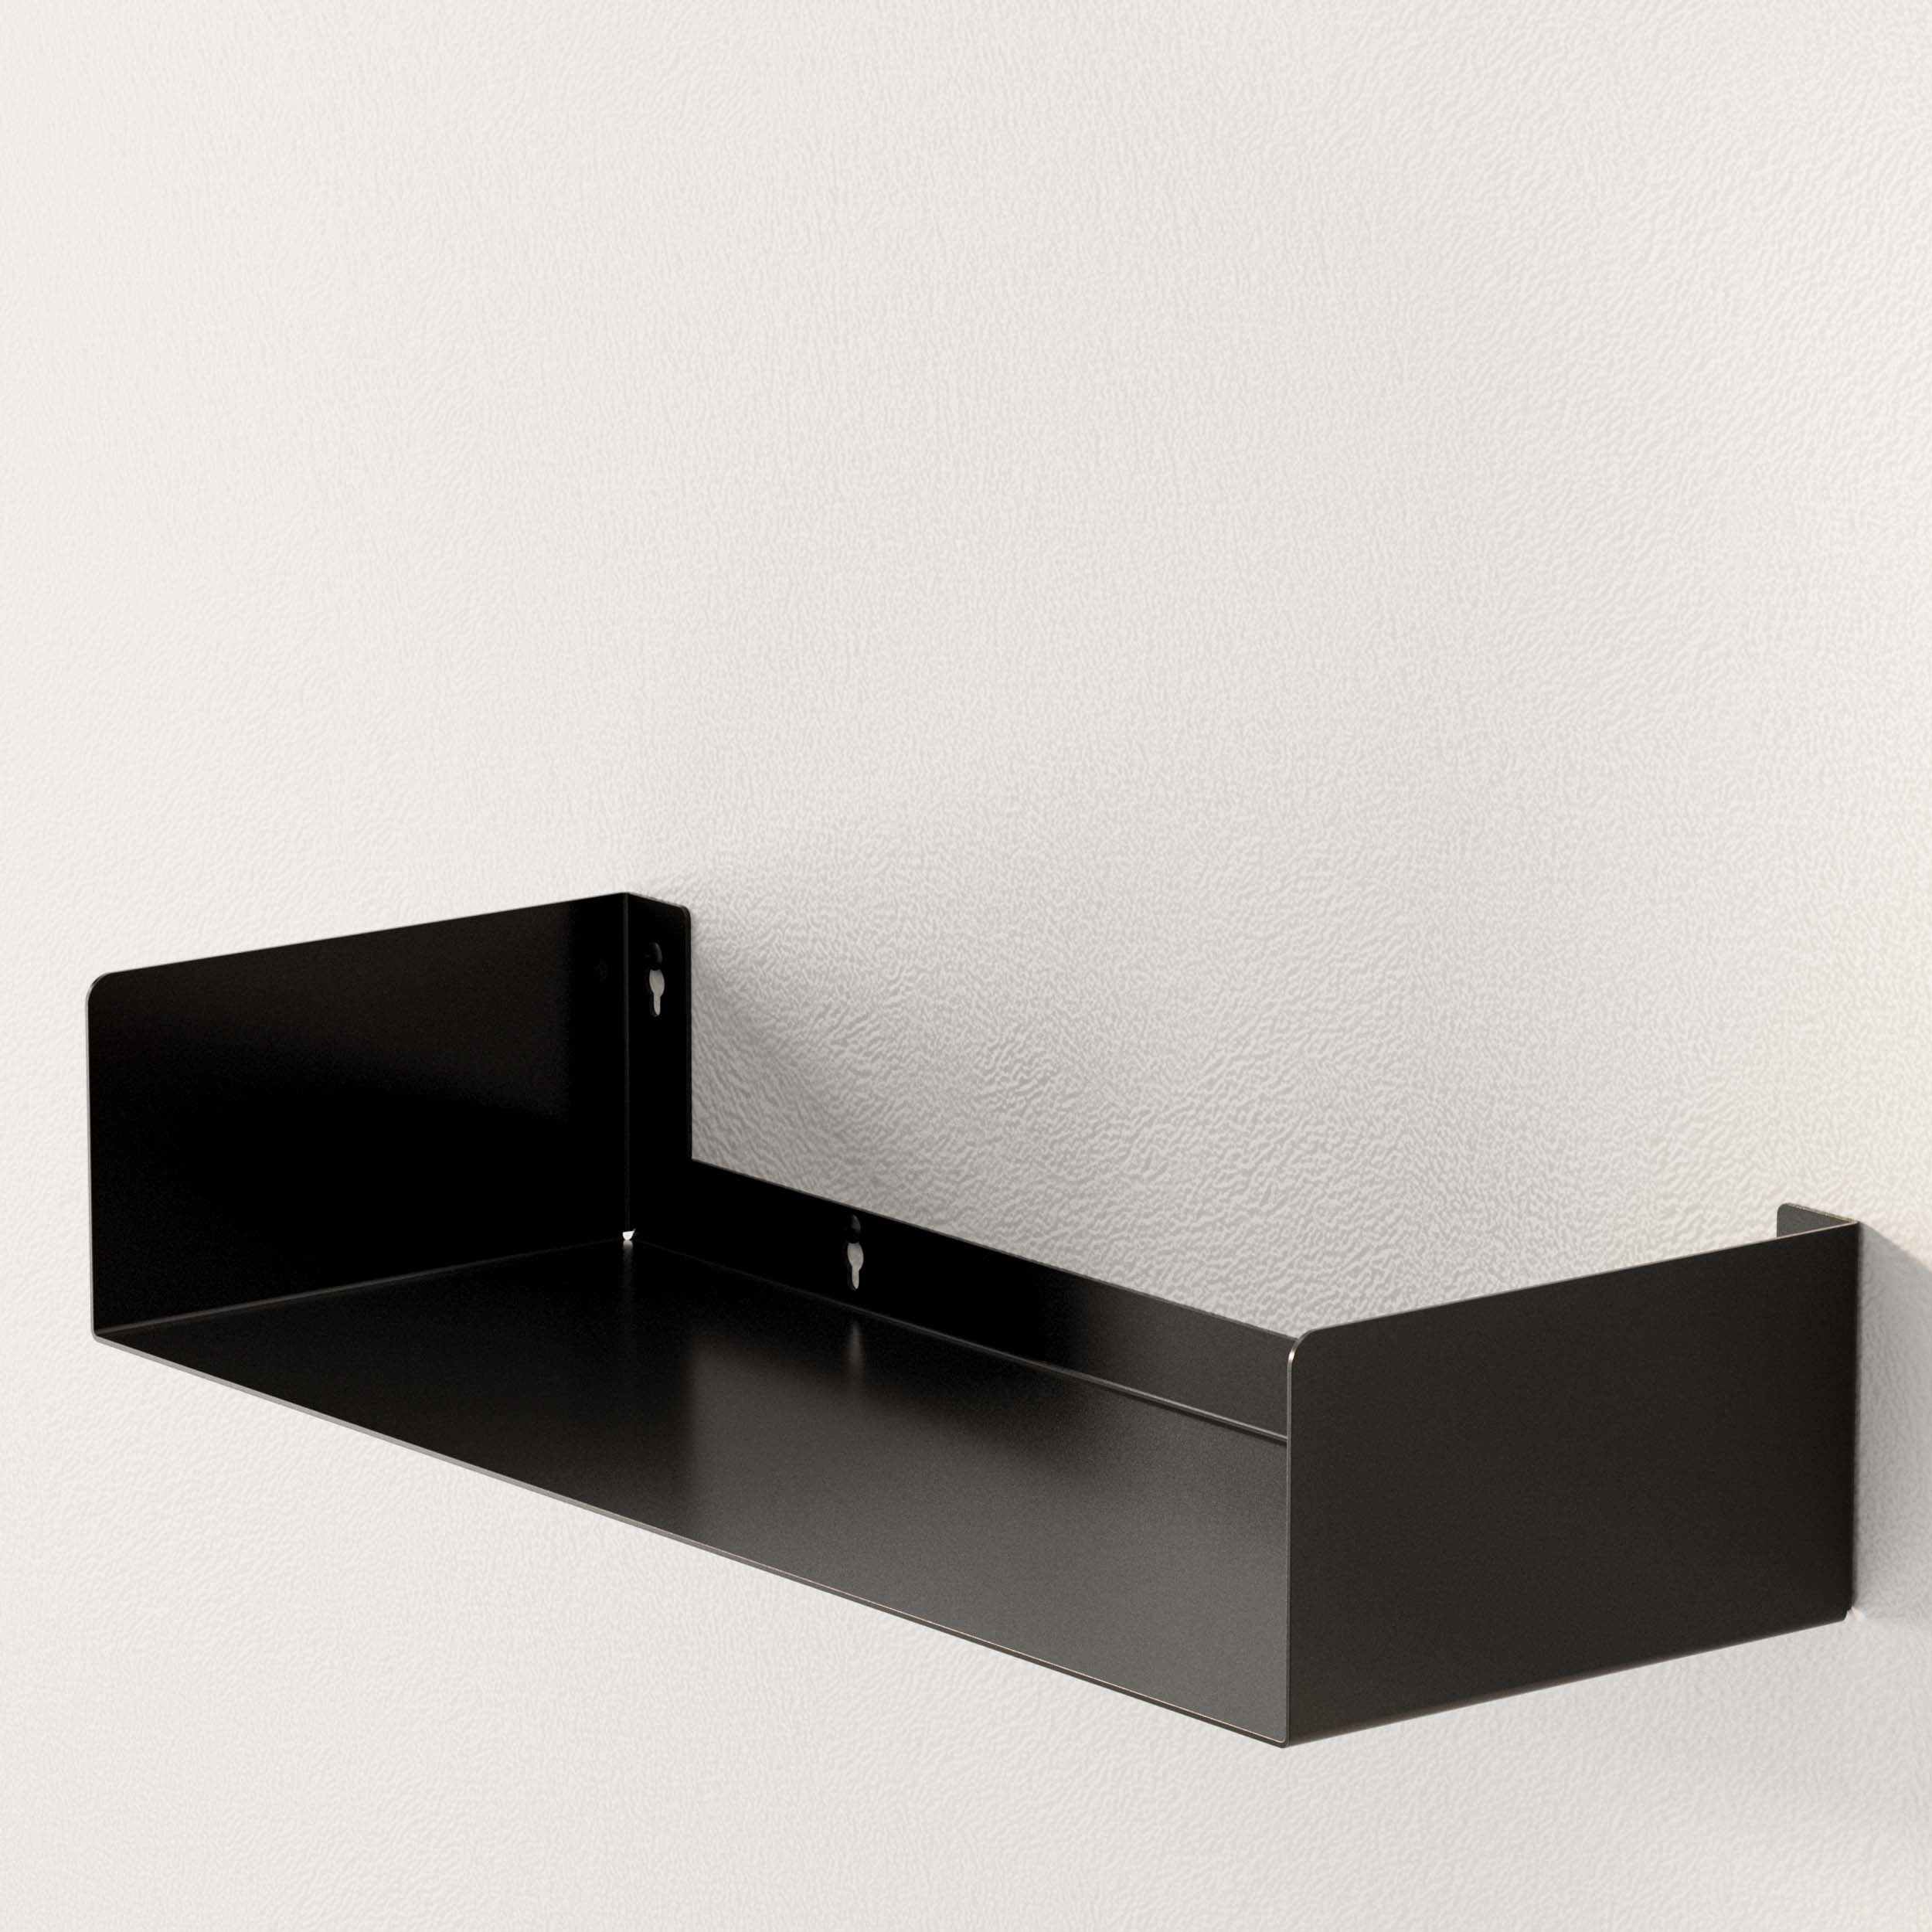 A black metal U-shape wall shelf installed on a white wall. The shelf’s minimalist design blends seamlessly into any interior, providing a stylish storage solution for various items.